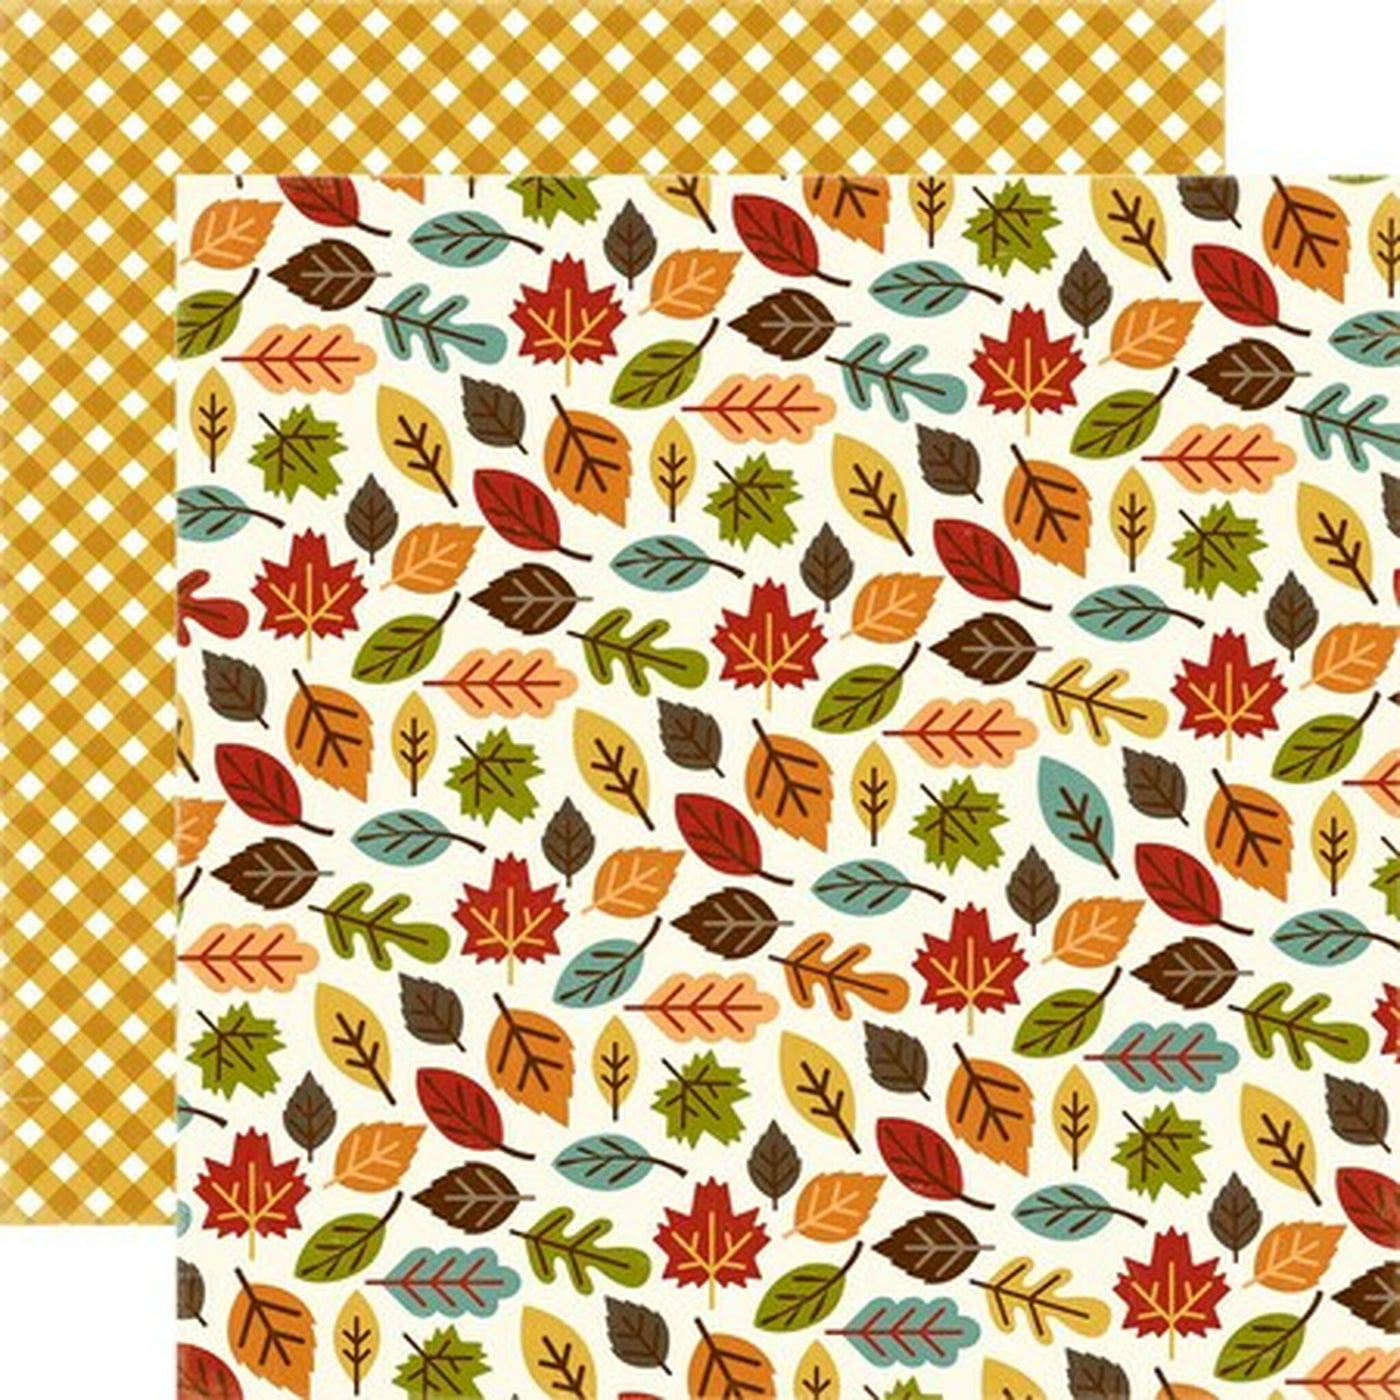 Multi-Colored (Side A - autumn leaves in gold, poppy, orange, light blue, olive green, and brown Side B - mustard yellow gingham on a cream background)